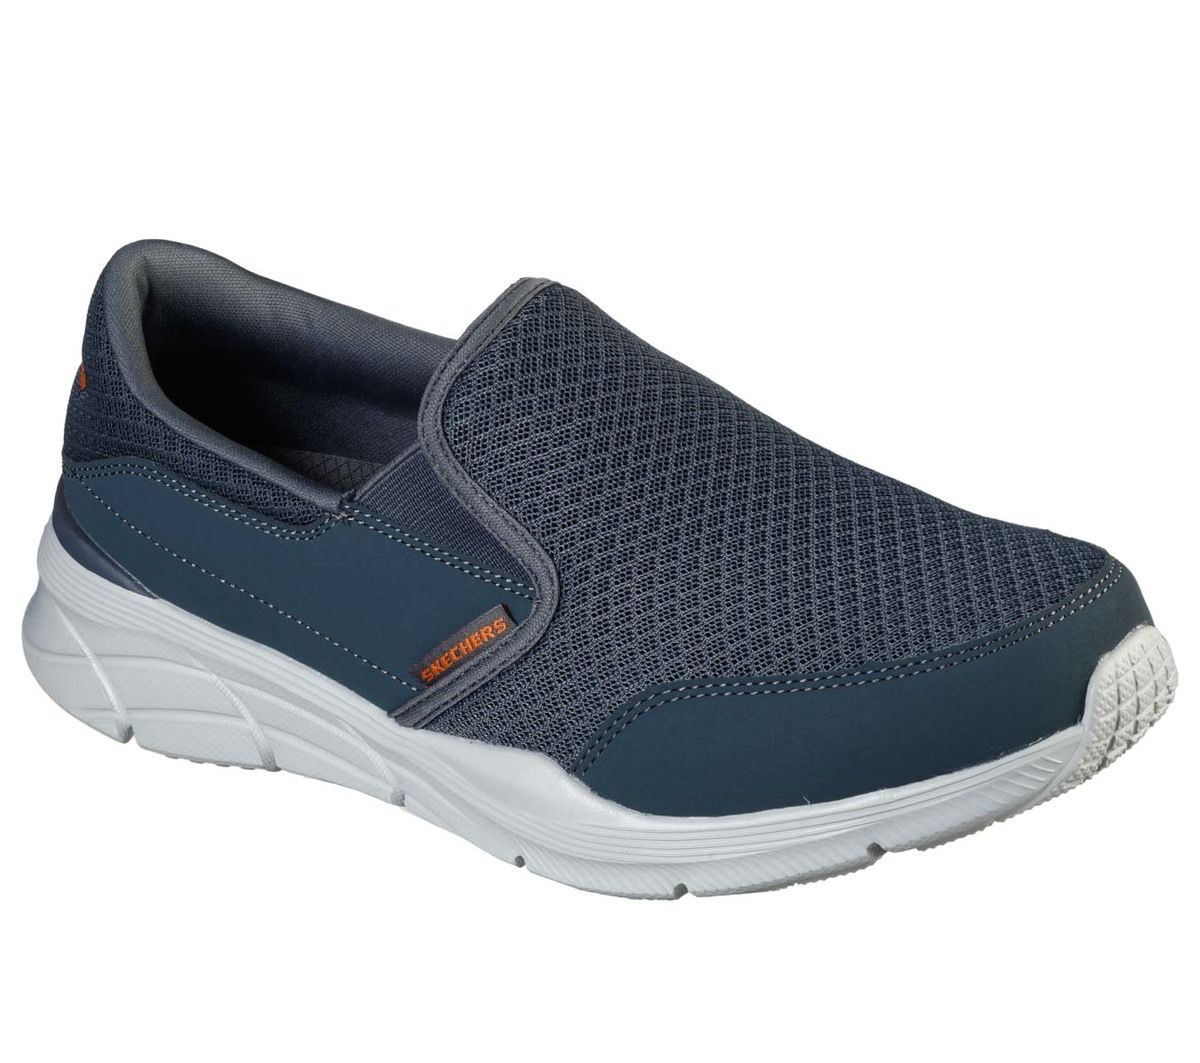 Skechers Persisting Relaxed Fit 232017 CCOR Charcoal grey trainers